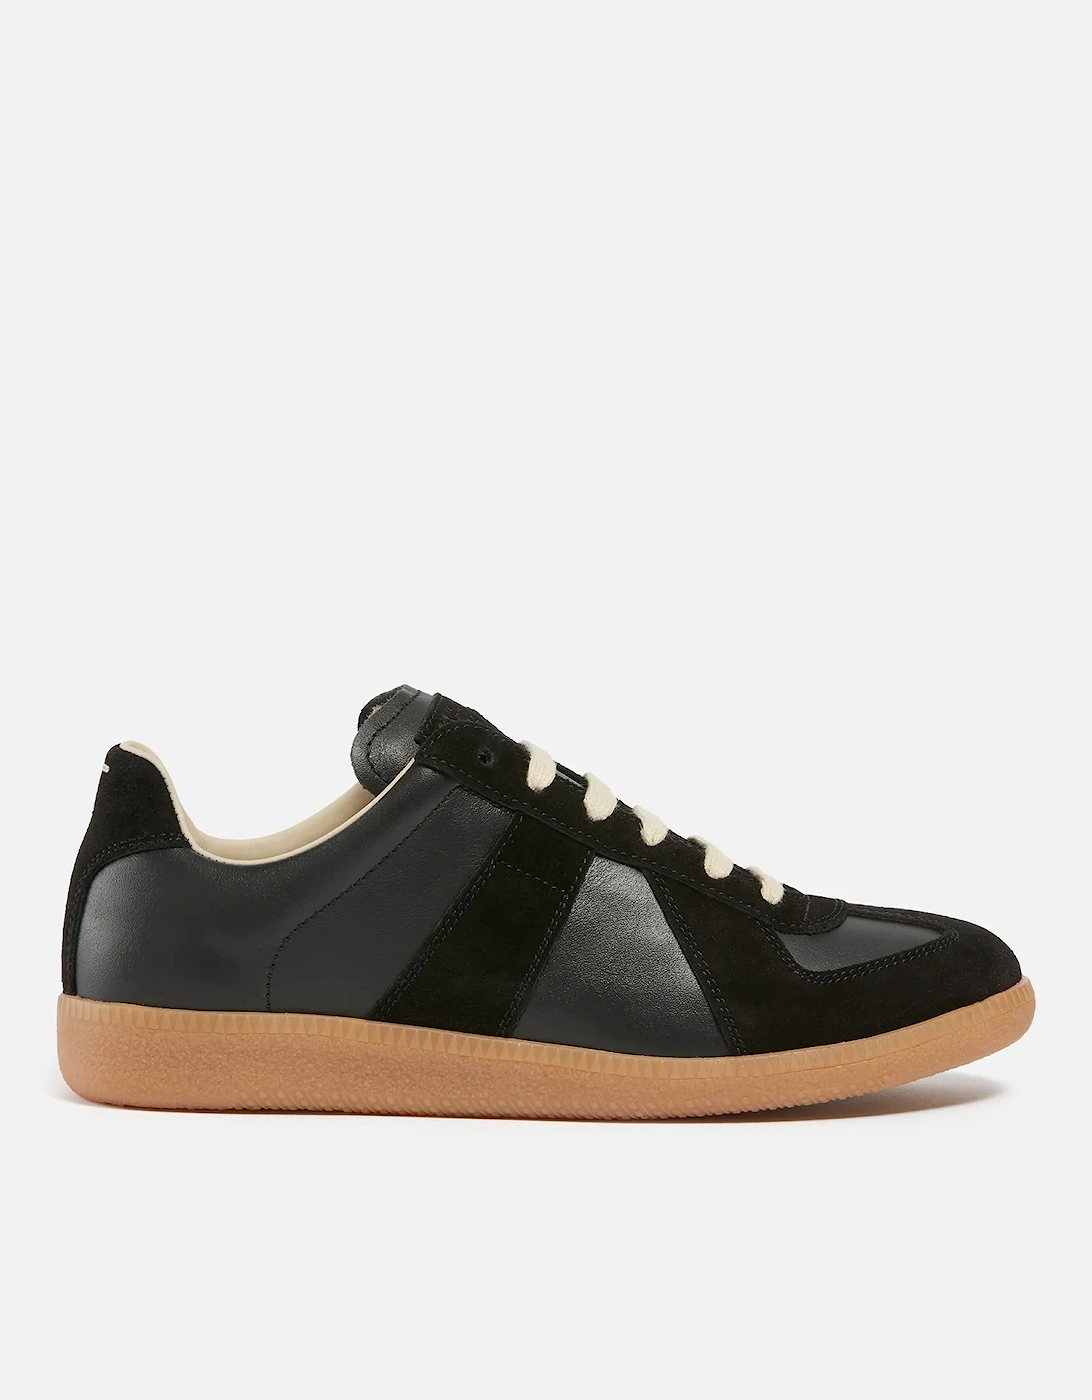 Women's Suede and Leather Replica Trainers - - Home - Women's Suede and Leather Replica Trainers